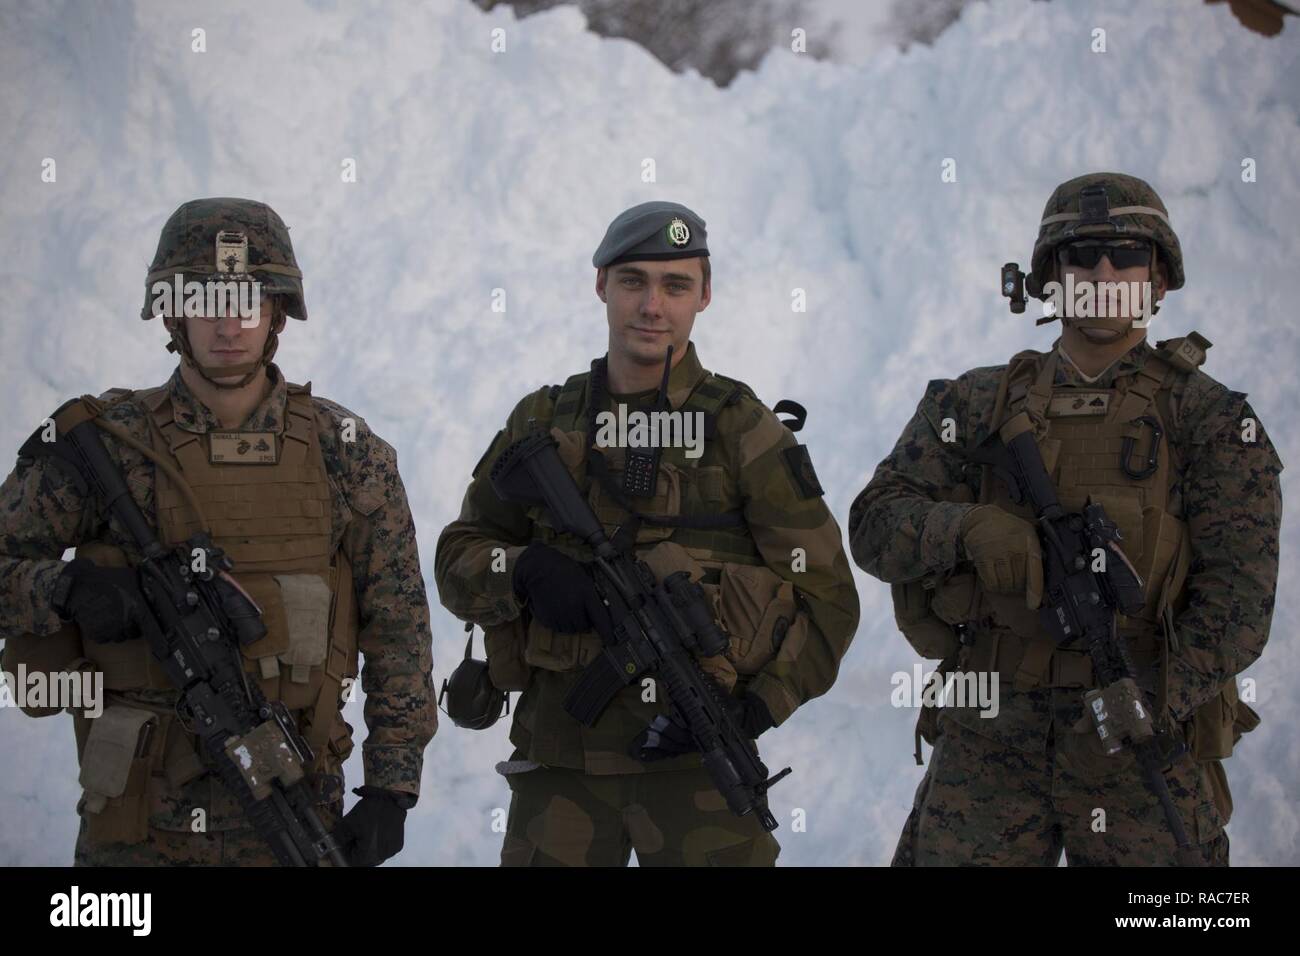 U.S. Marine Corporal Jacob Thomas and Cpl. Eduardo Duranespino stand alongside a Norwegian Army guard at Vaernes Garnison, Norway, Jan. 16, 2017. The Marines with Black Sea Rotational Force 17.1 arrived at Vaernes Garnison early in the morning as part of Marine Rotational Force Europe 17.1. Stock Photo